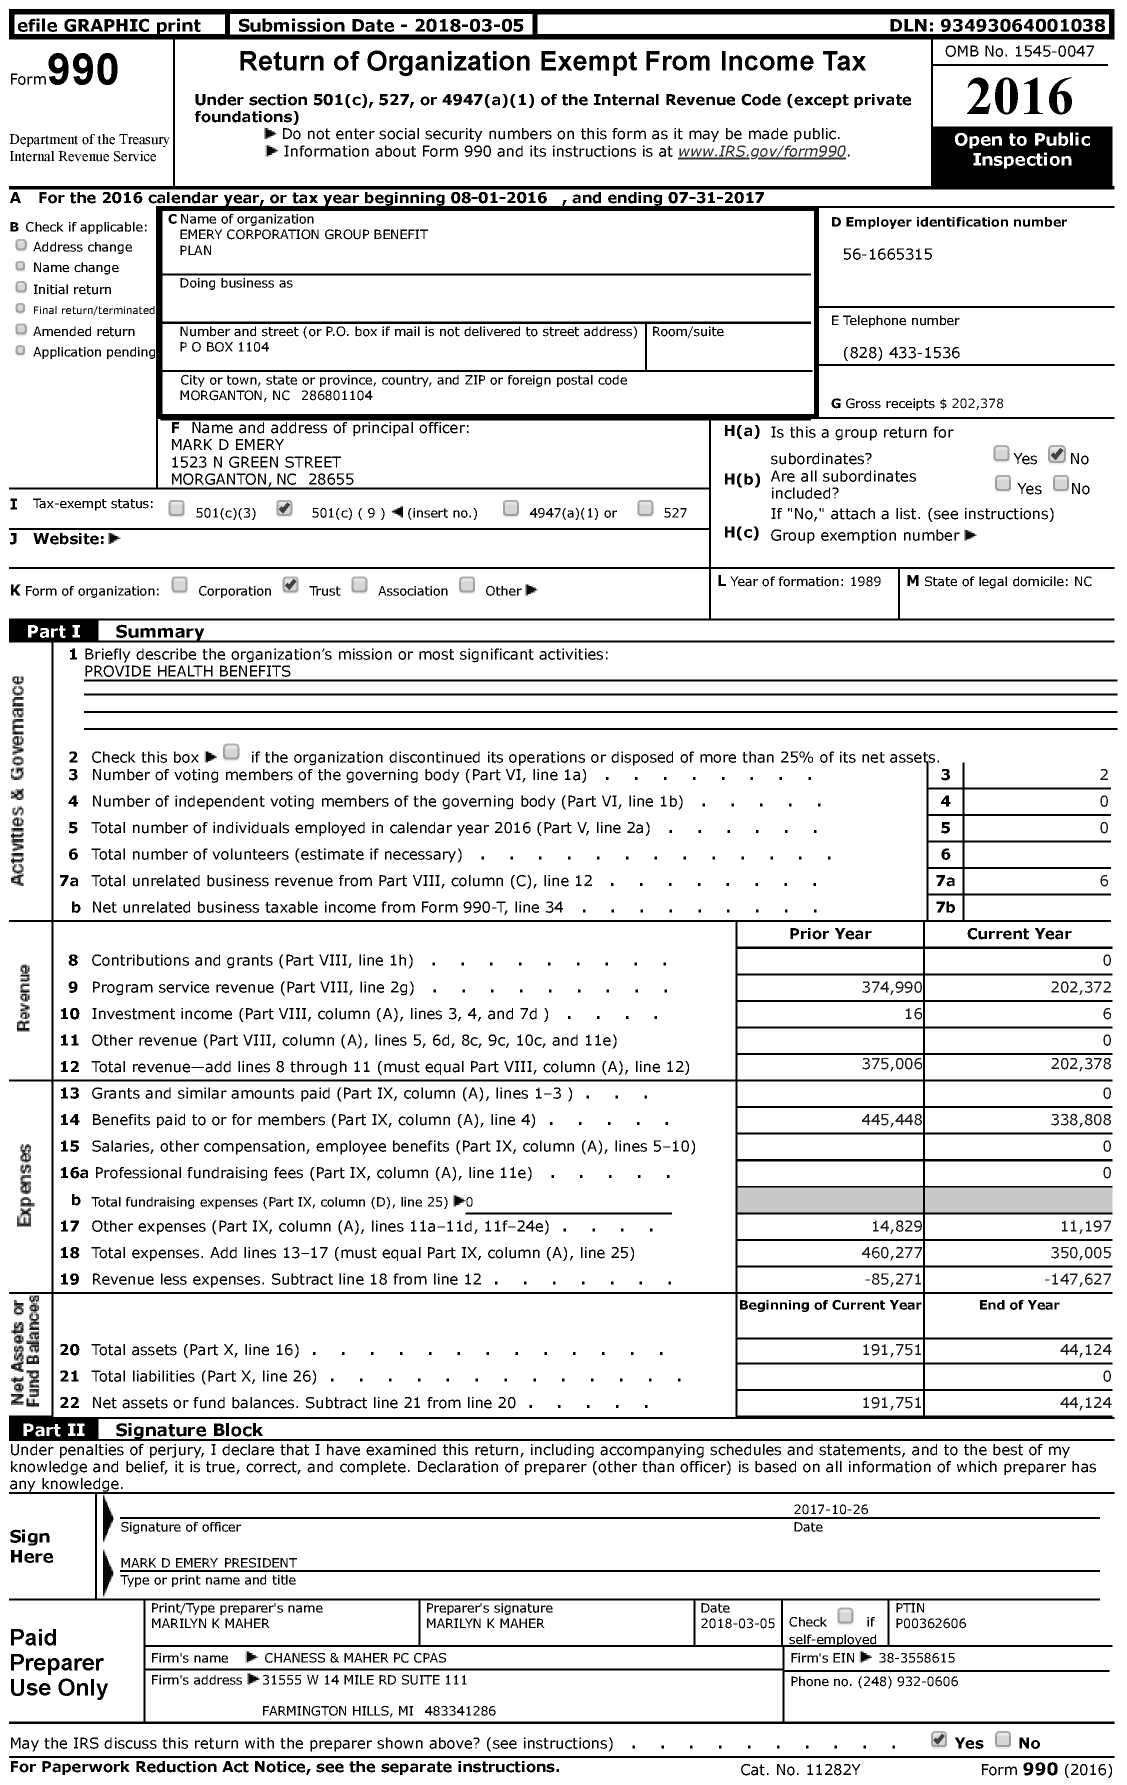 Image of first page of 2016 Form 990 for Emery Corporation Group Benefit Plan